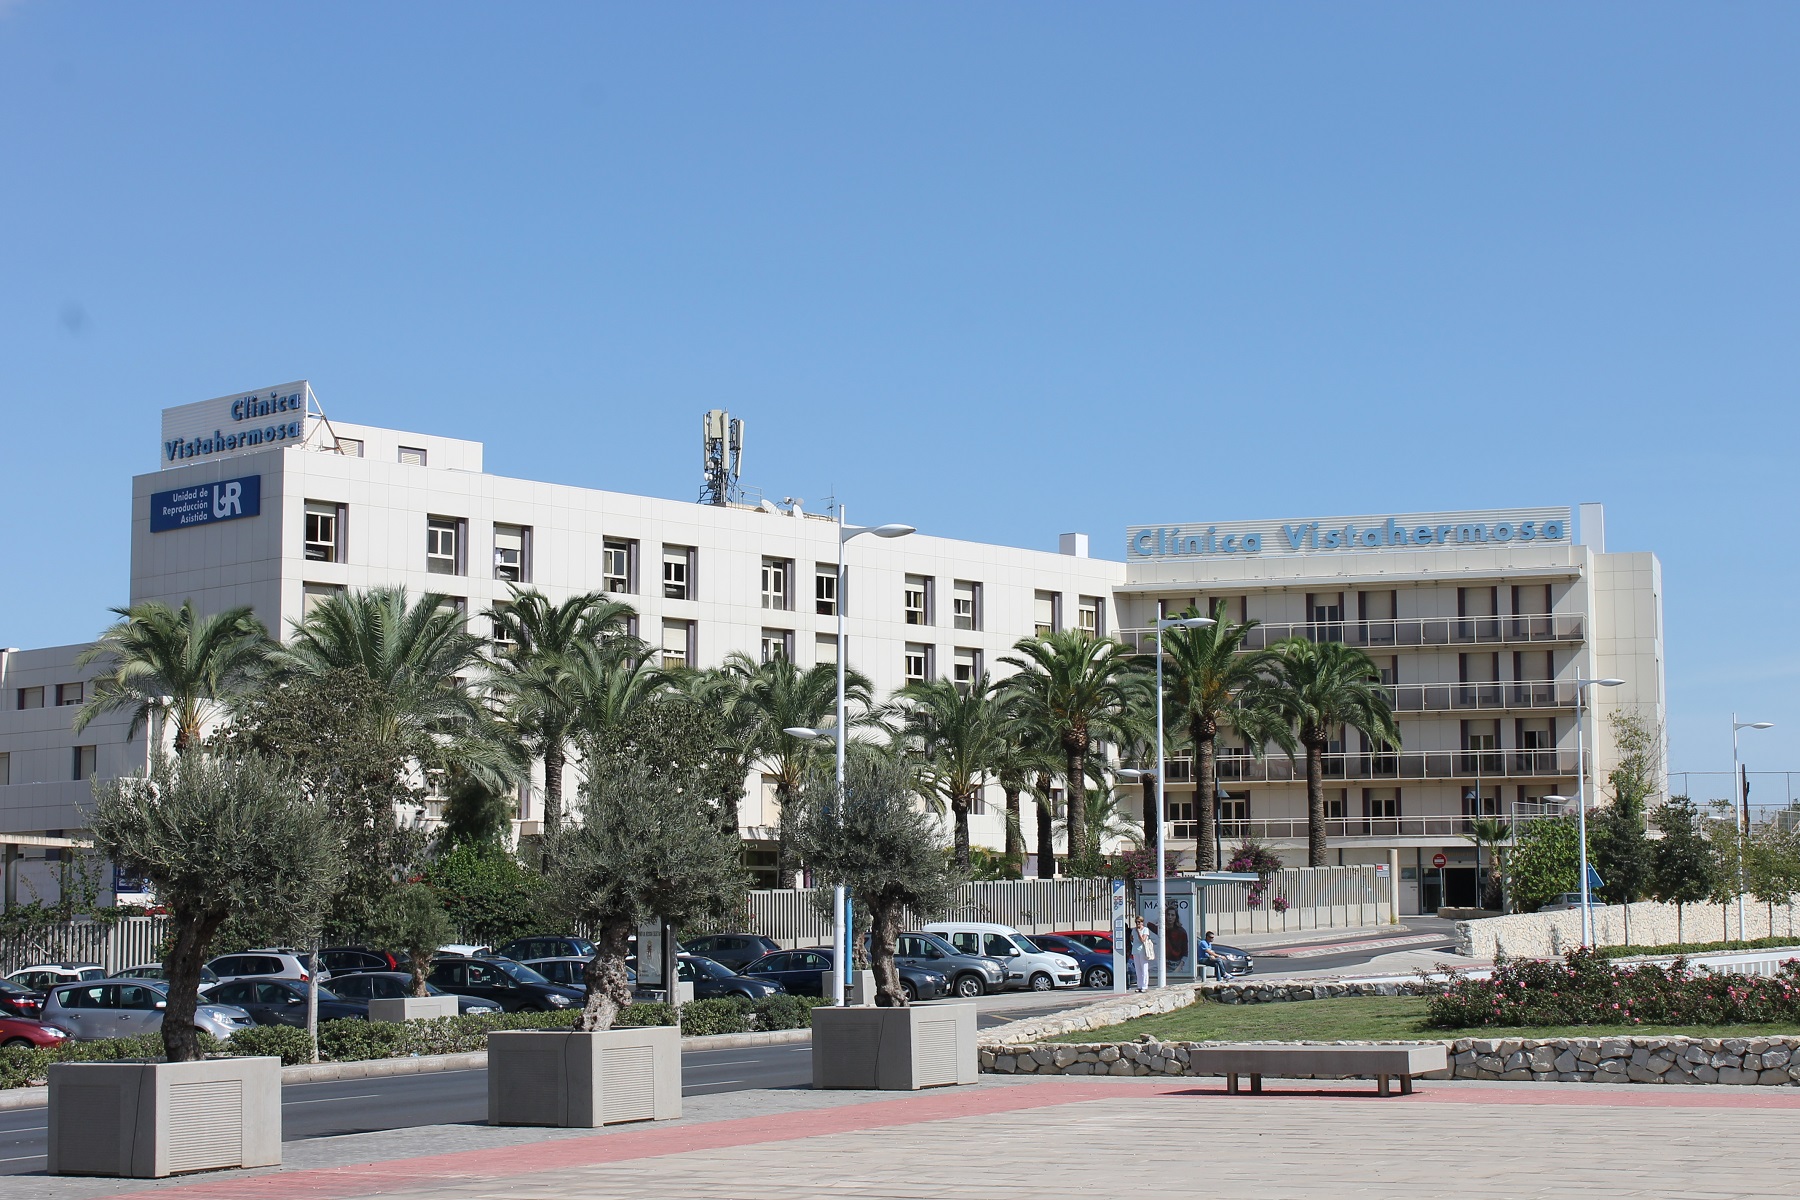 HLA Vistahermosa Reproduction Unit is integrated inside the best private hospital in Alicante